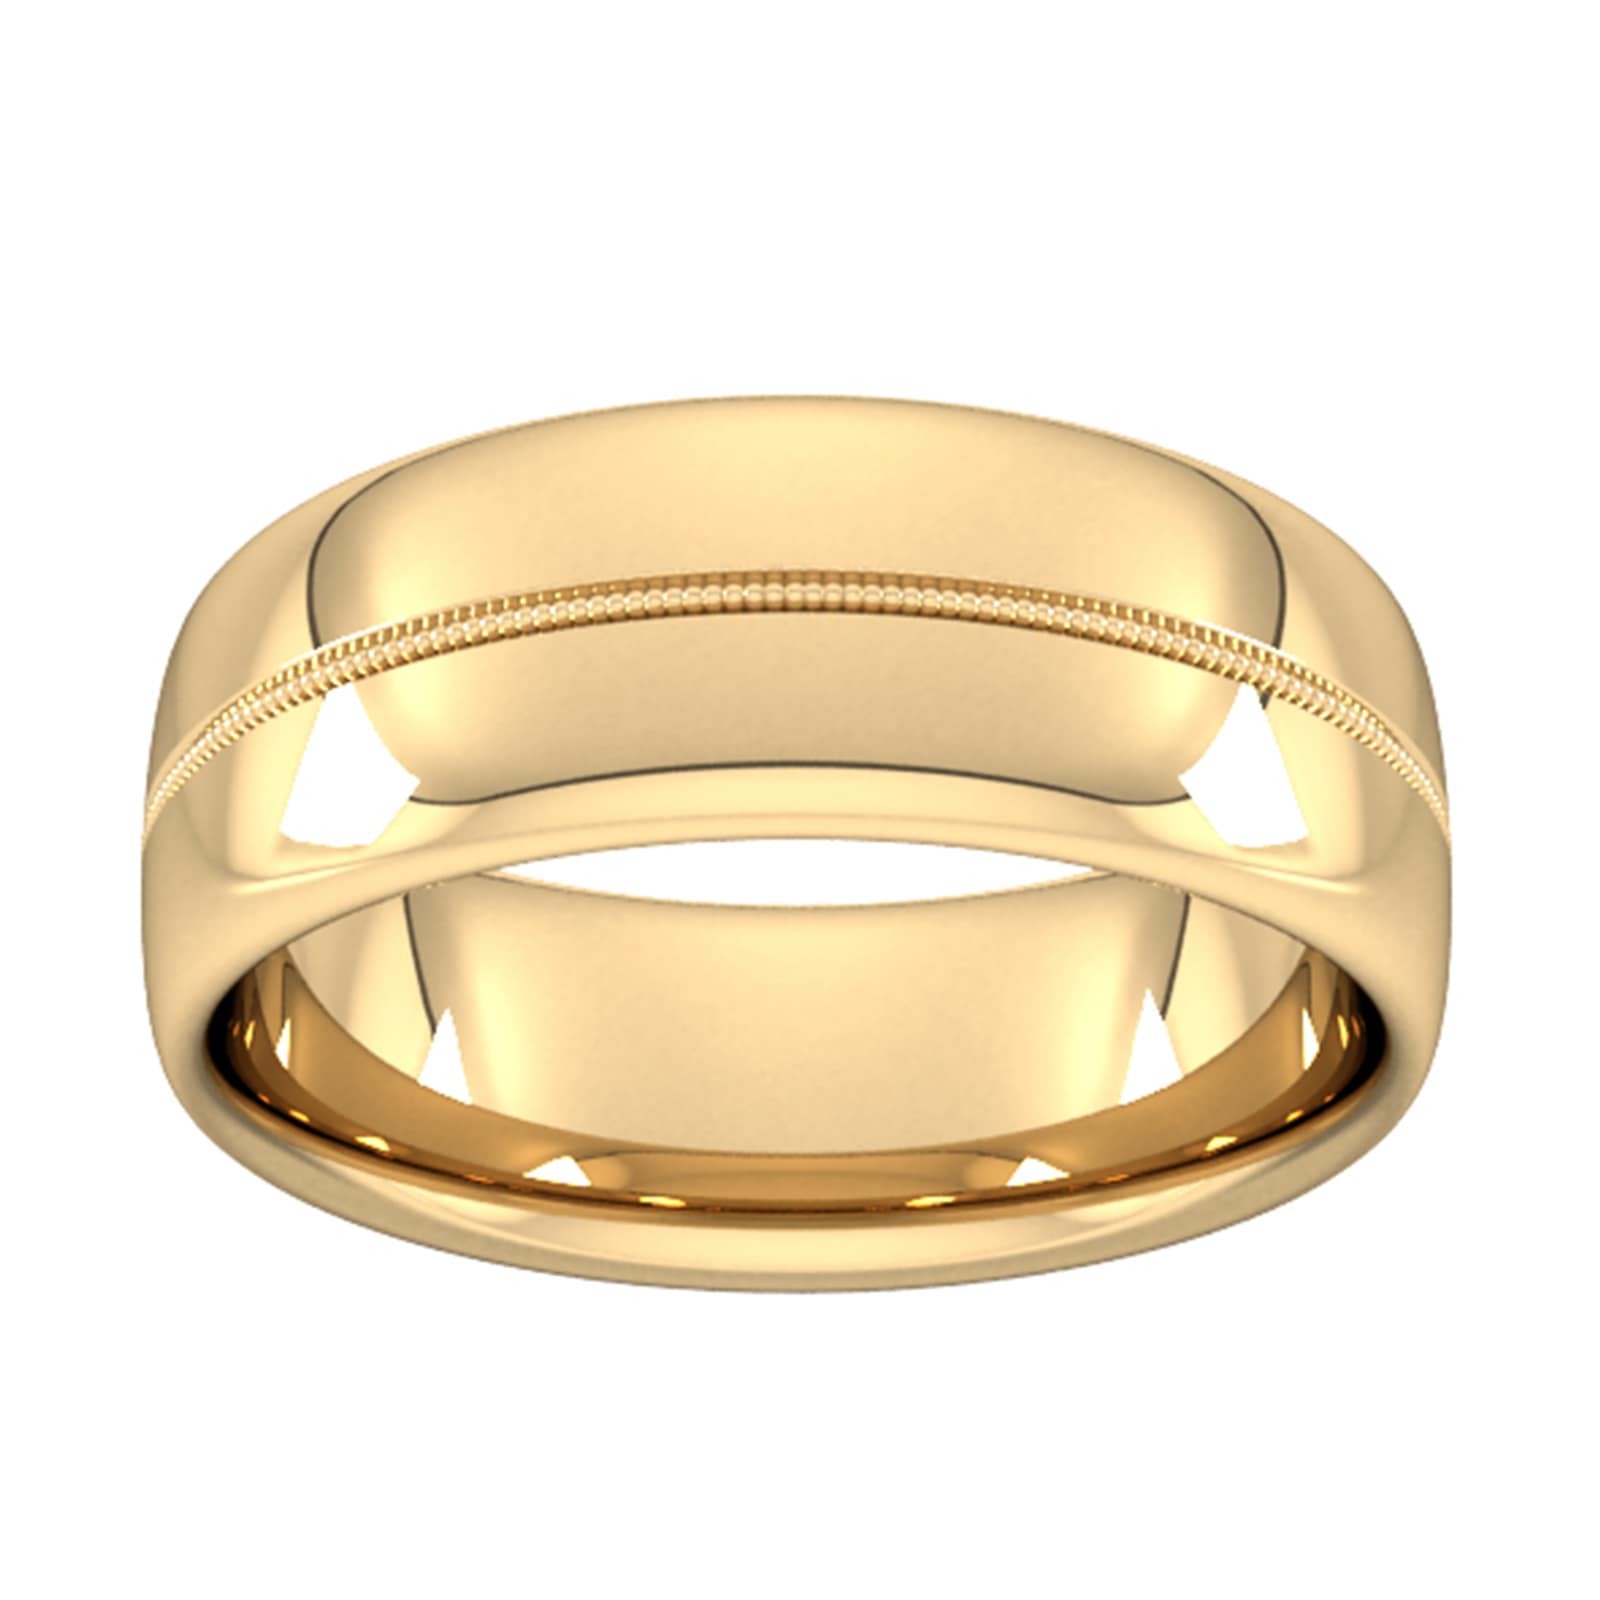 8mm Traditional Court Heavy Milgrain Centre Wedding Ring In 18 Carat Yellow Gold - Ring Size W